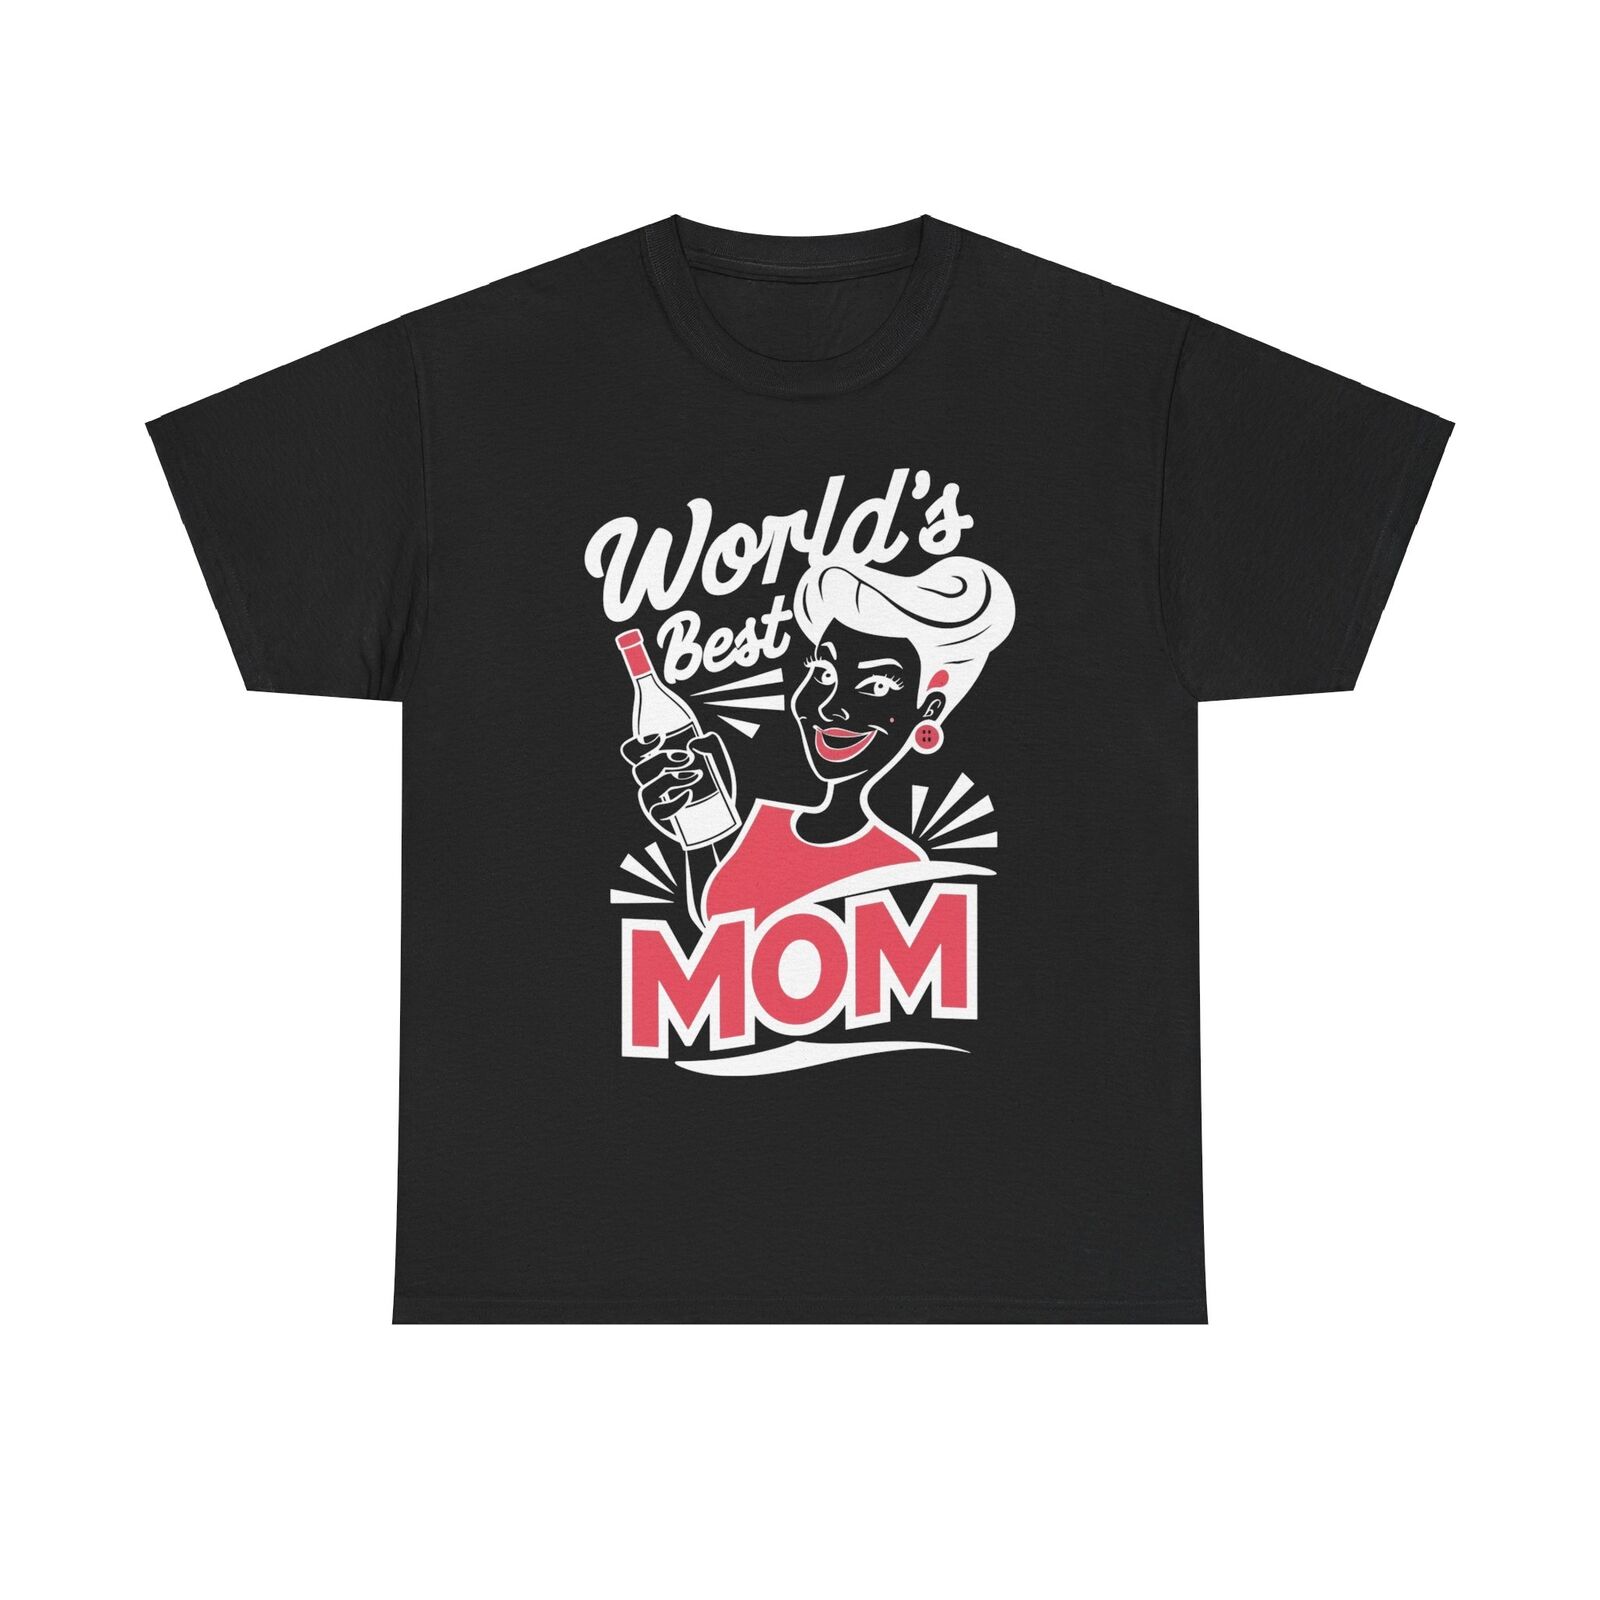 World's Best Mom Mother's Day Funny Comical Humor Gag Gift Tee T-shirt